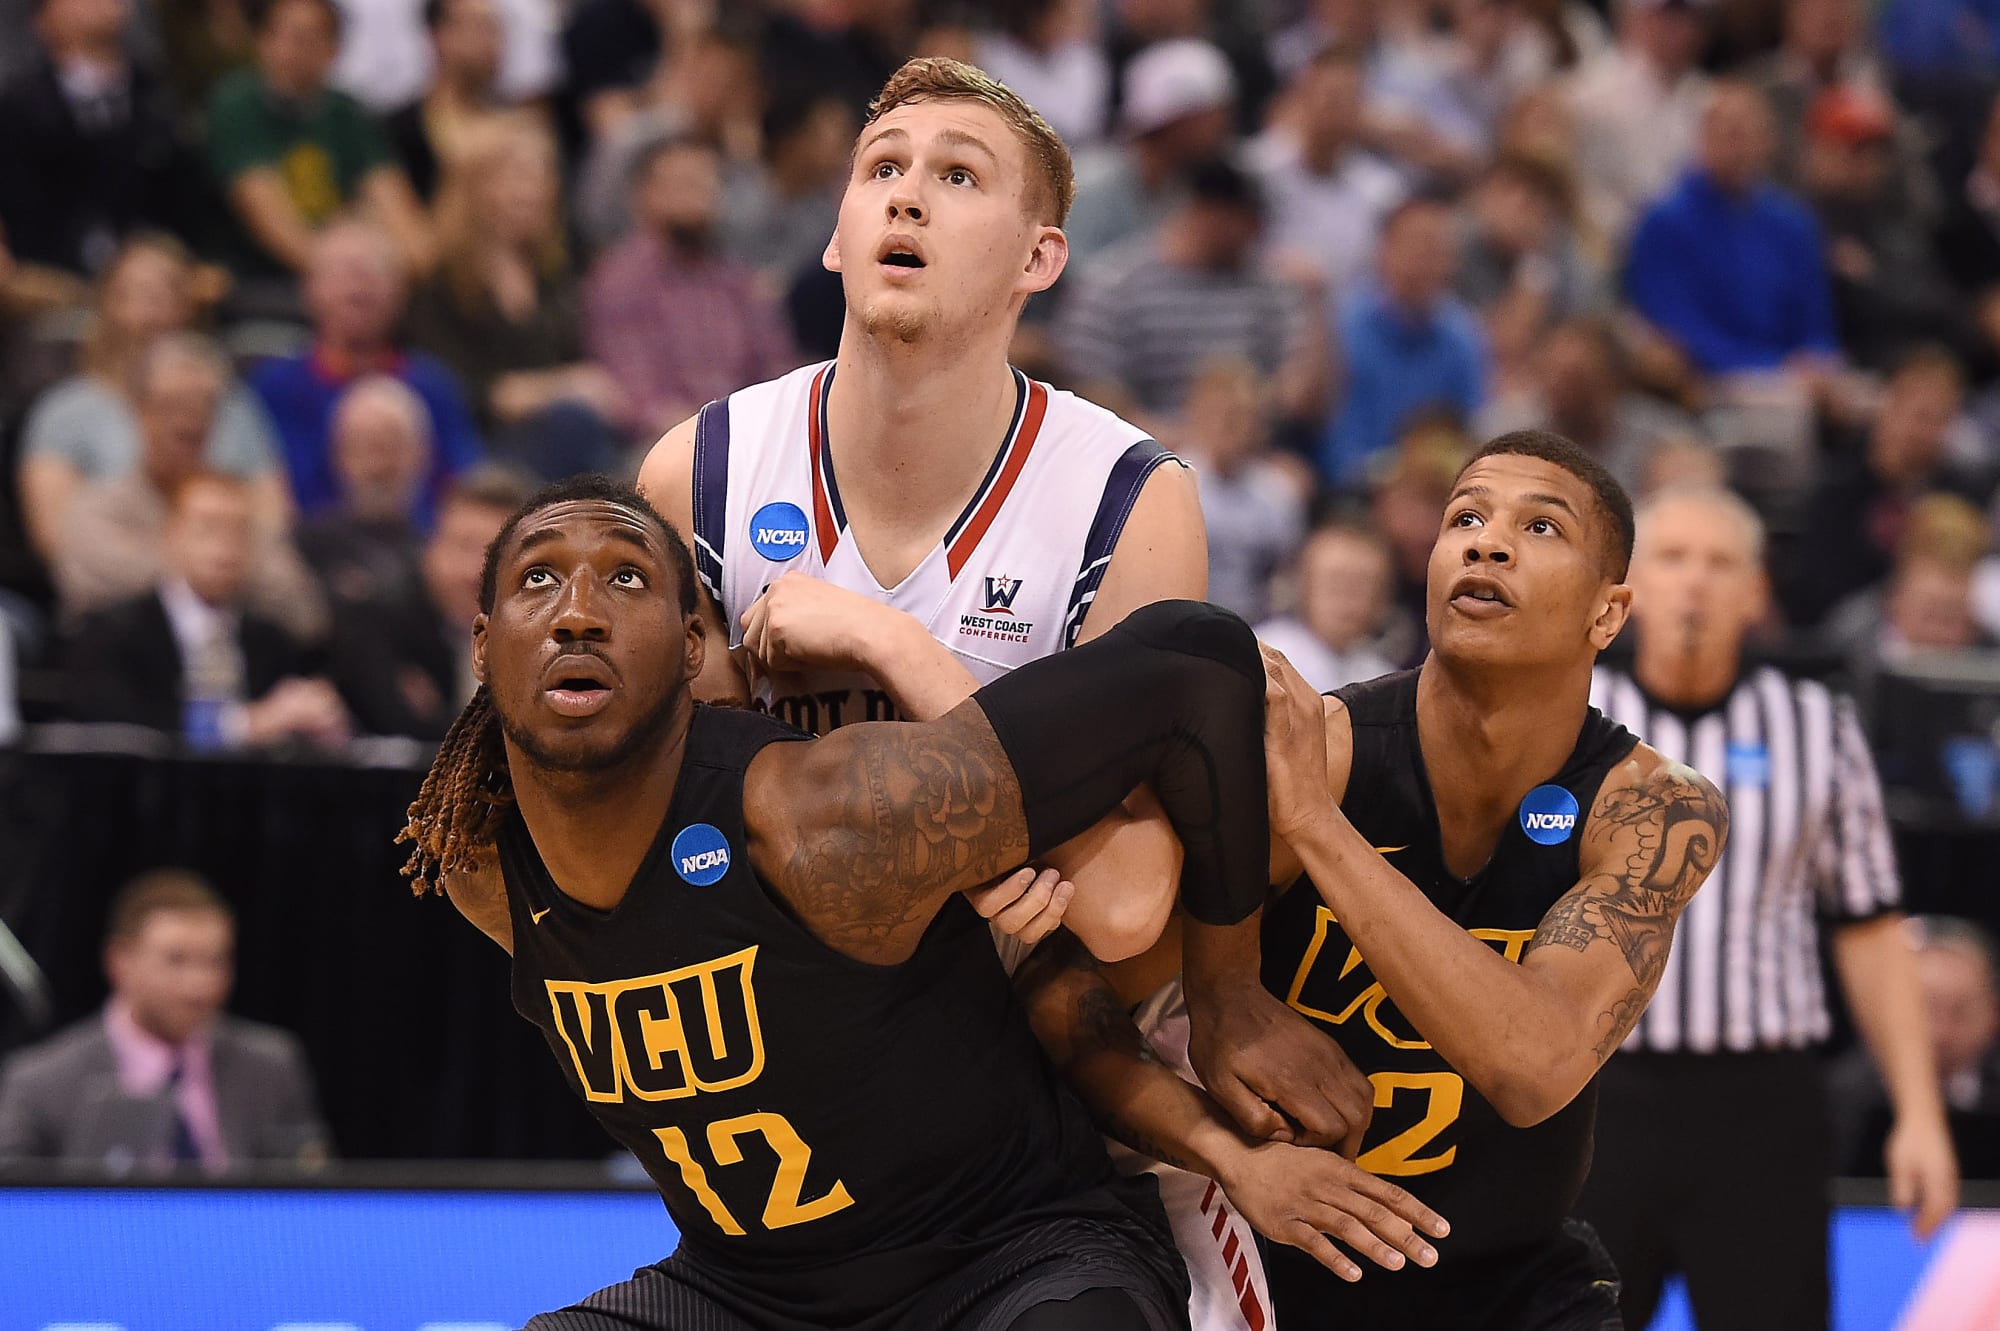 indianapolis-colts-sign-vcu-basketball-player-mo-alie-cox